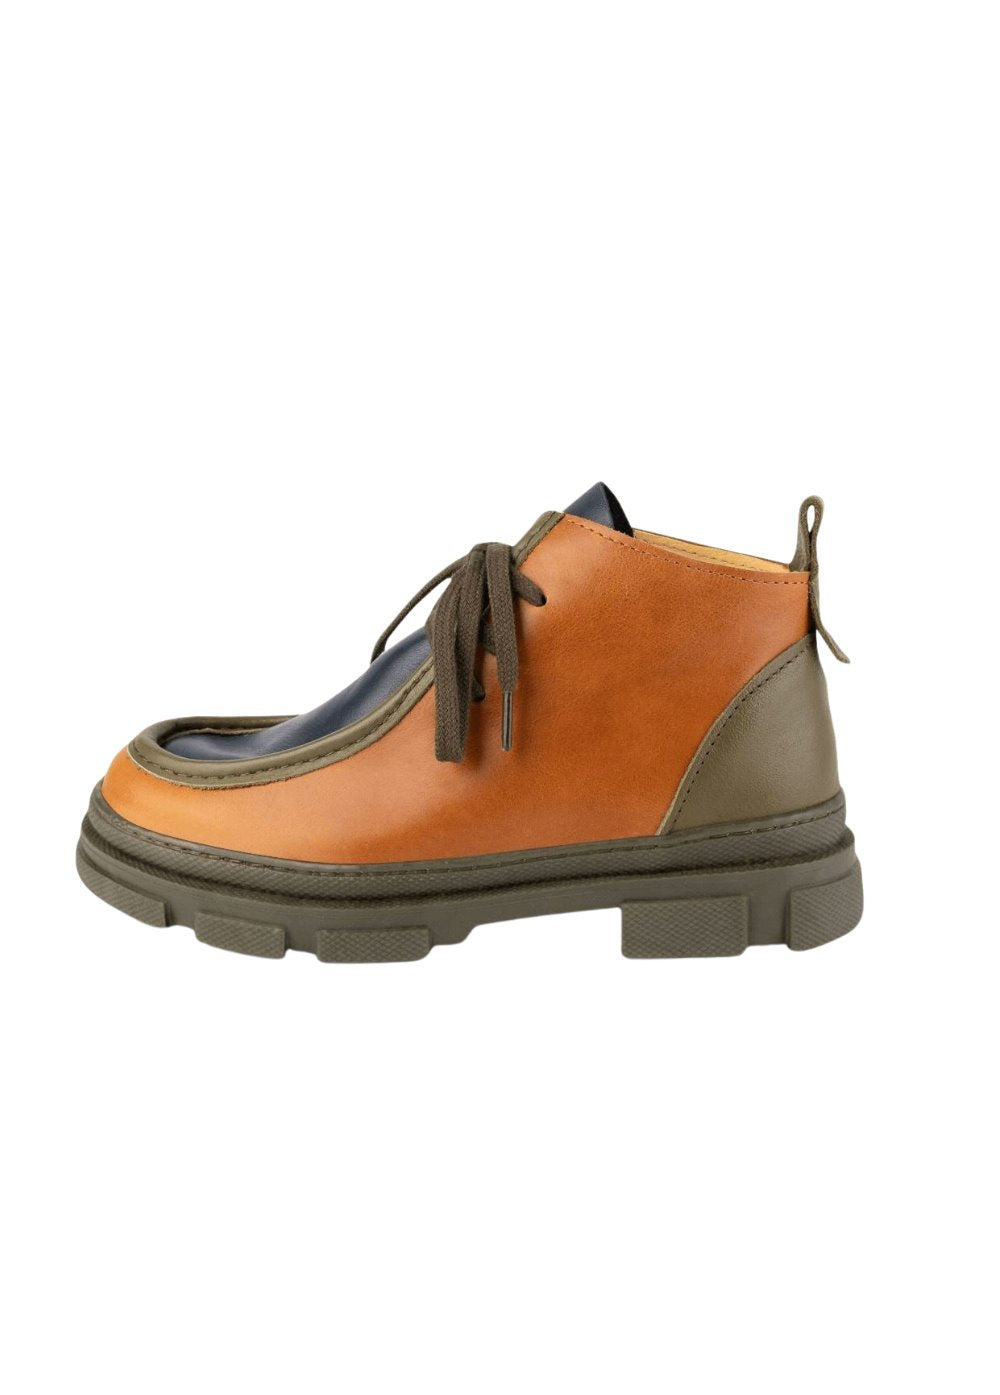 Wallabee Boots - Camel & Olive Shoes Dulis Shoes 